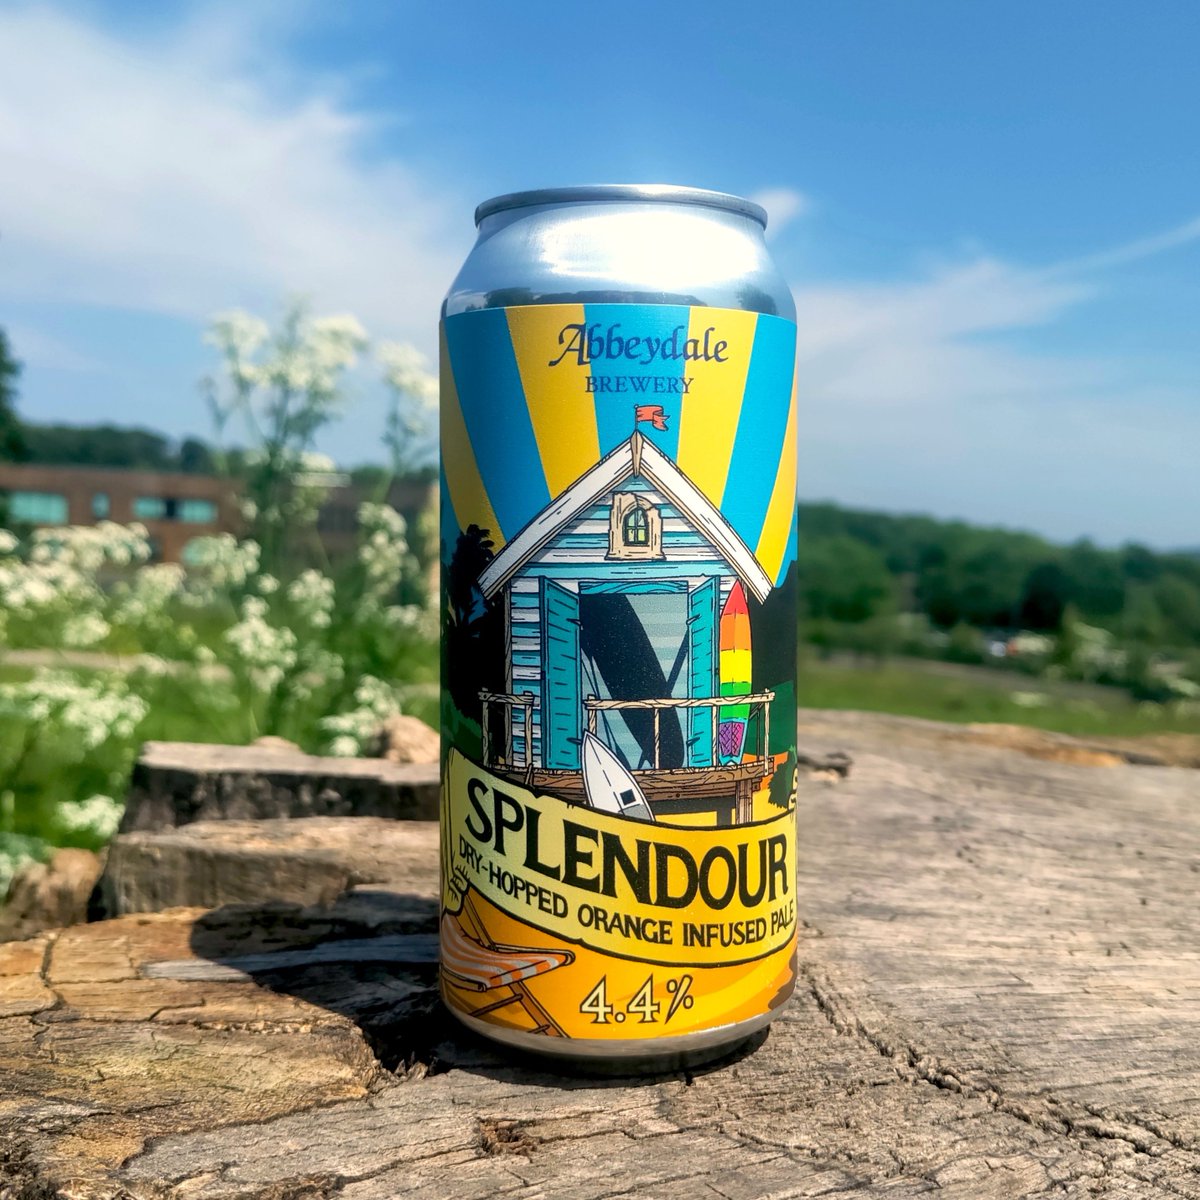 There's another Bank Holiday weekend coming up! And while we can't guarantee the weather, we can promise tasty beer! Get your order in by midday Thursday for delivery in time to fill the fridge: abbeydalebrewery.co.uk/shop